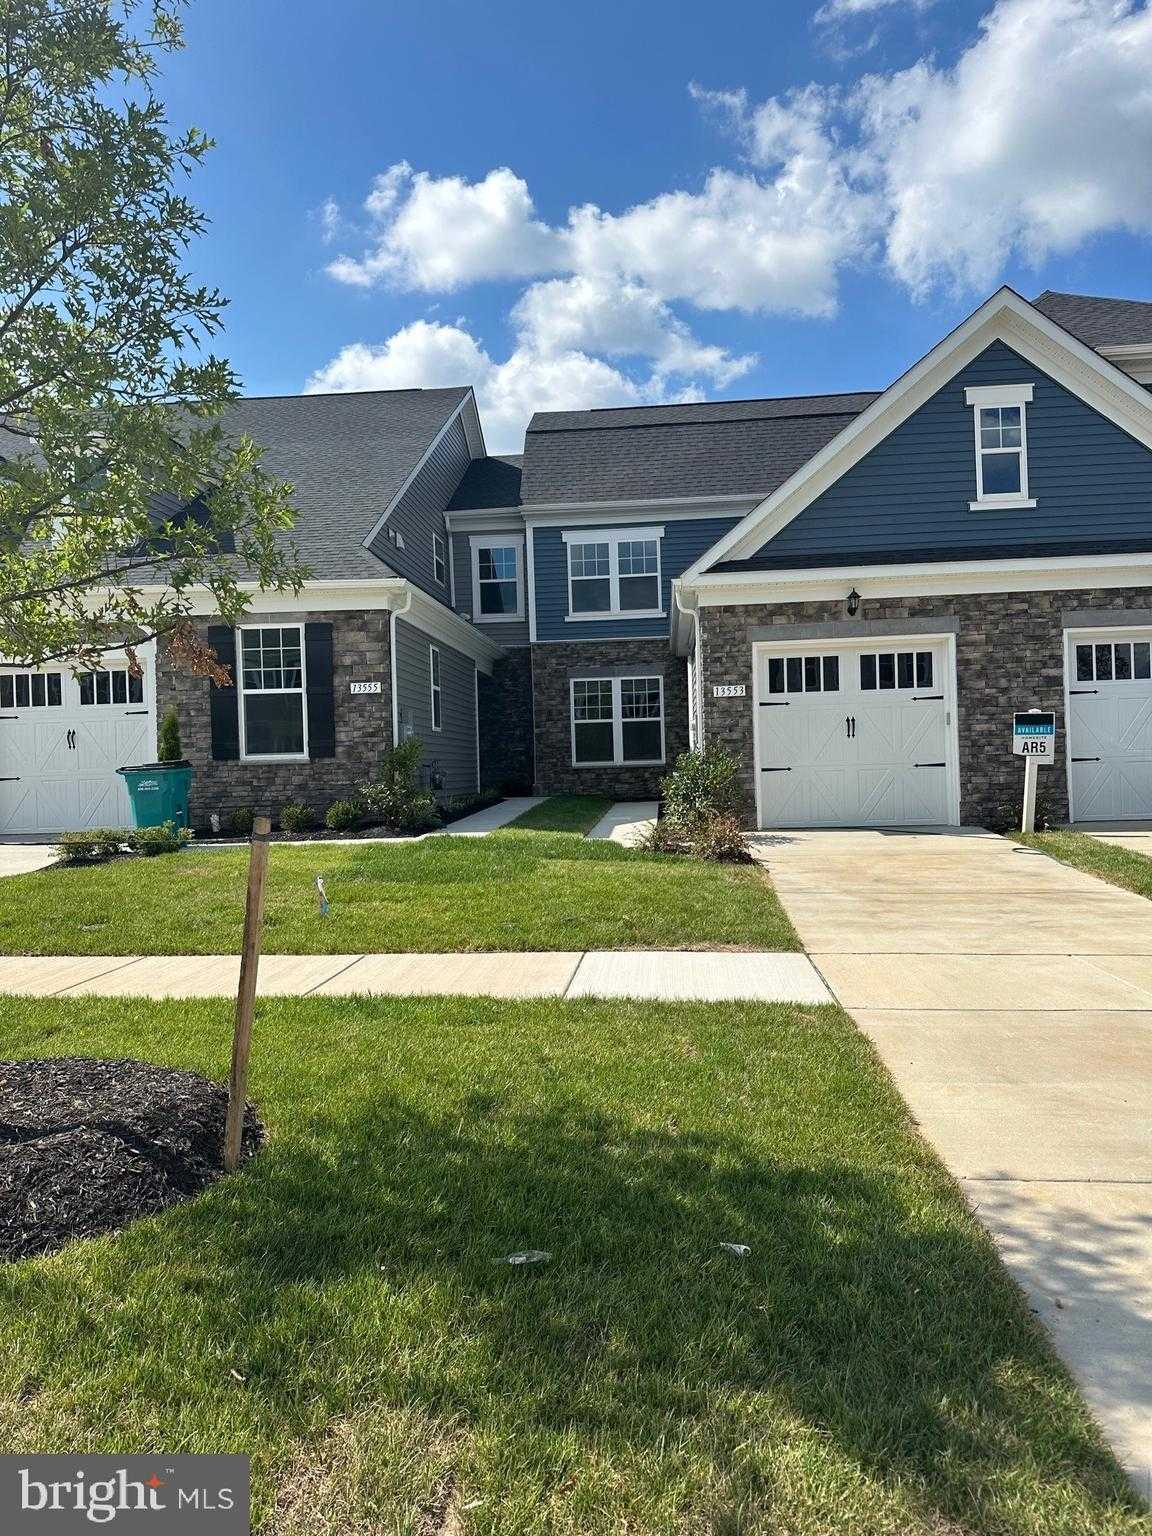 View CLARKSBURG, MD 20871 townhome